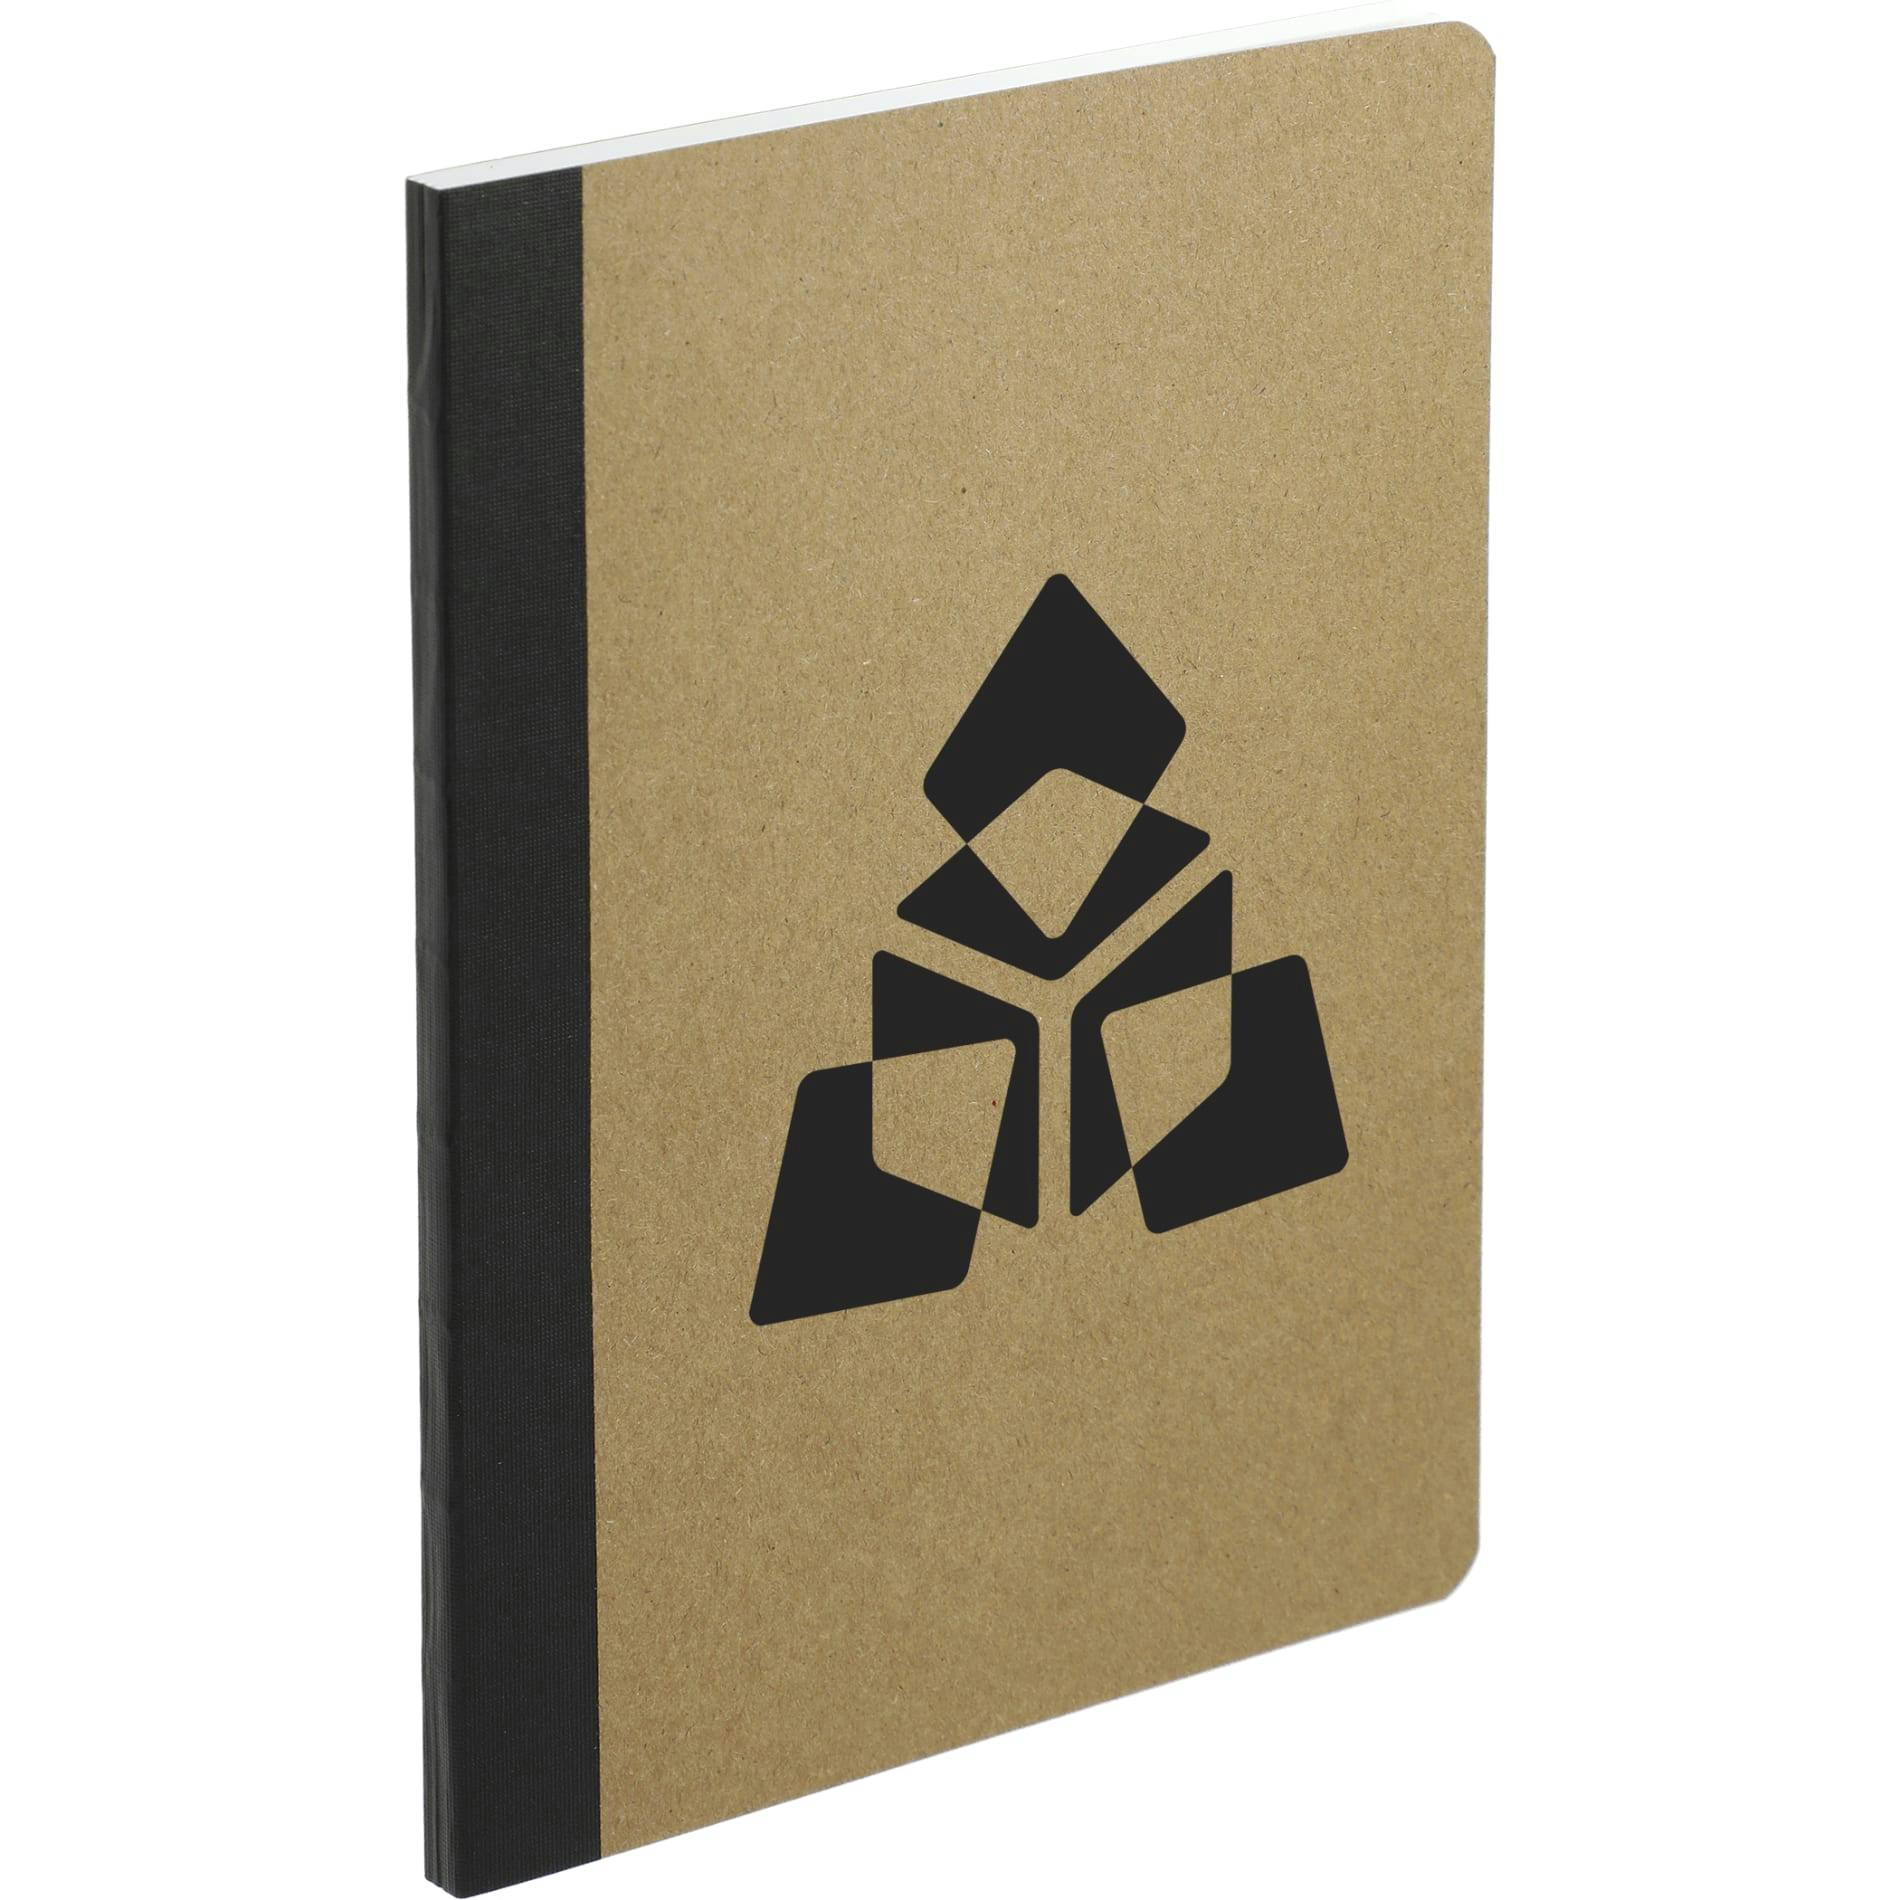 5" x 7" FSC® Mix Composition Notebook - additional Image 1